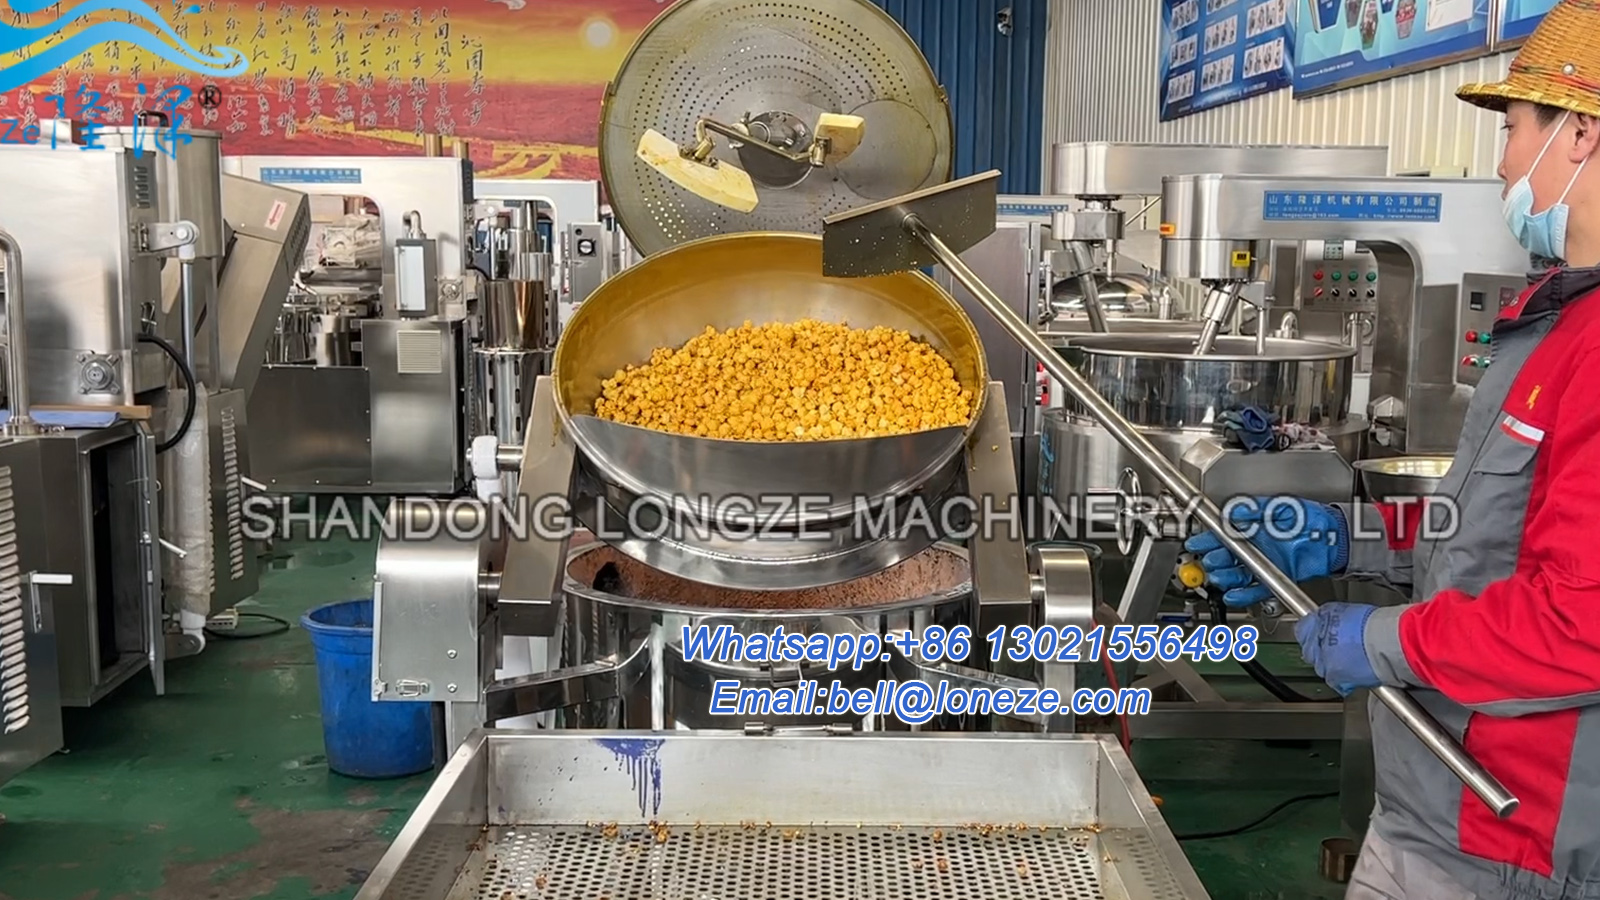 Industrial Automatic Electric Popcorn Making Machine